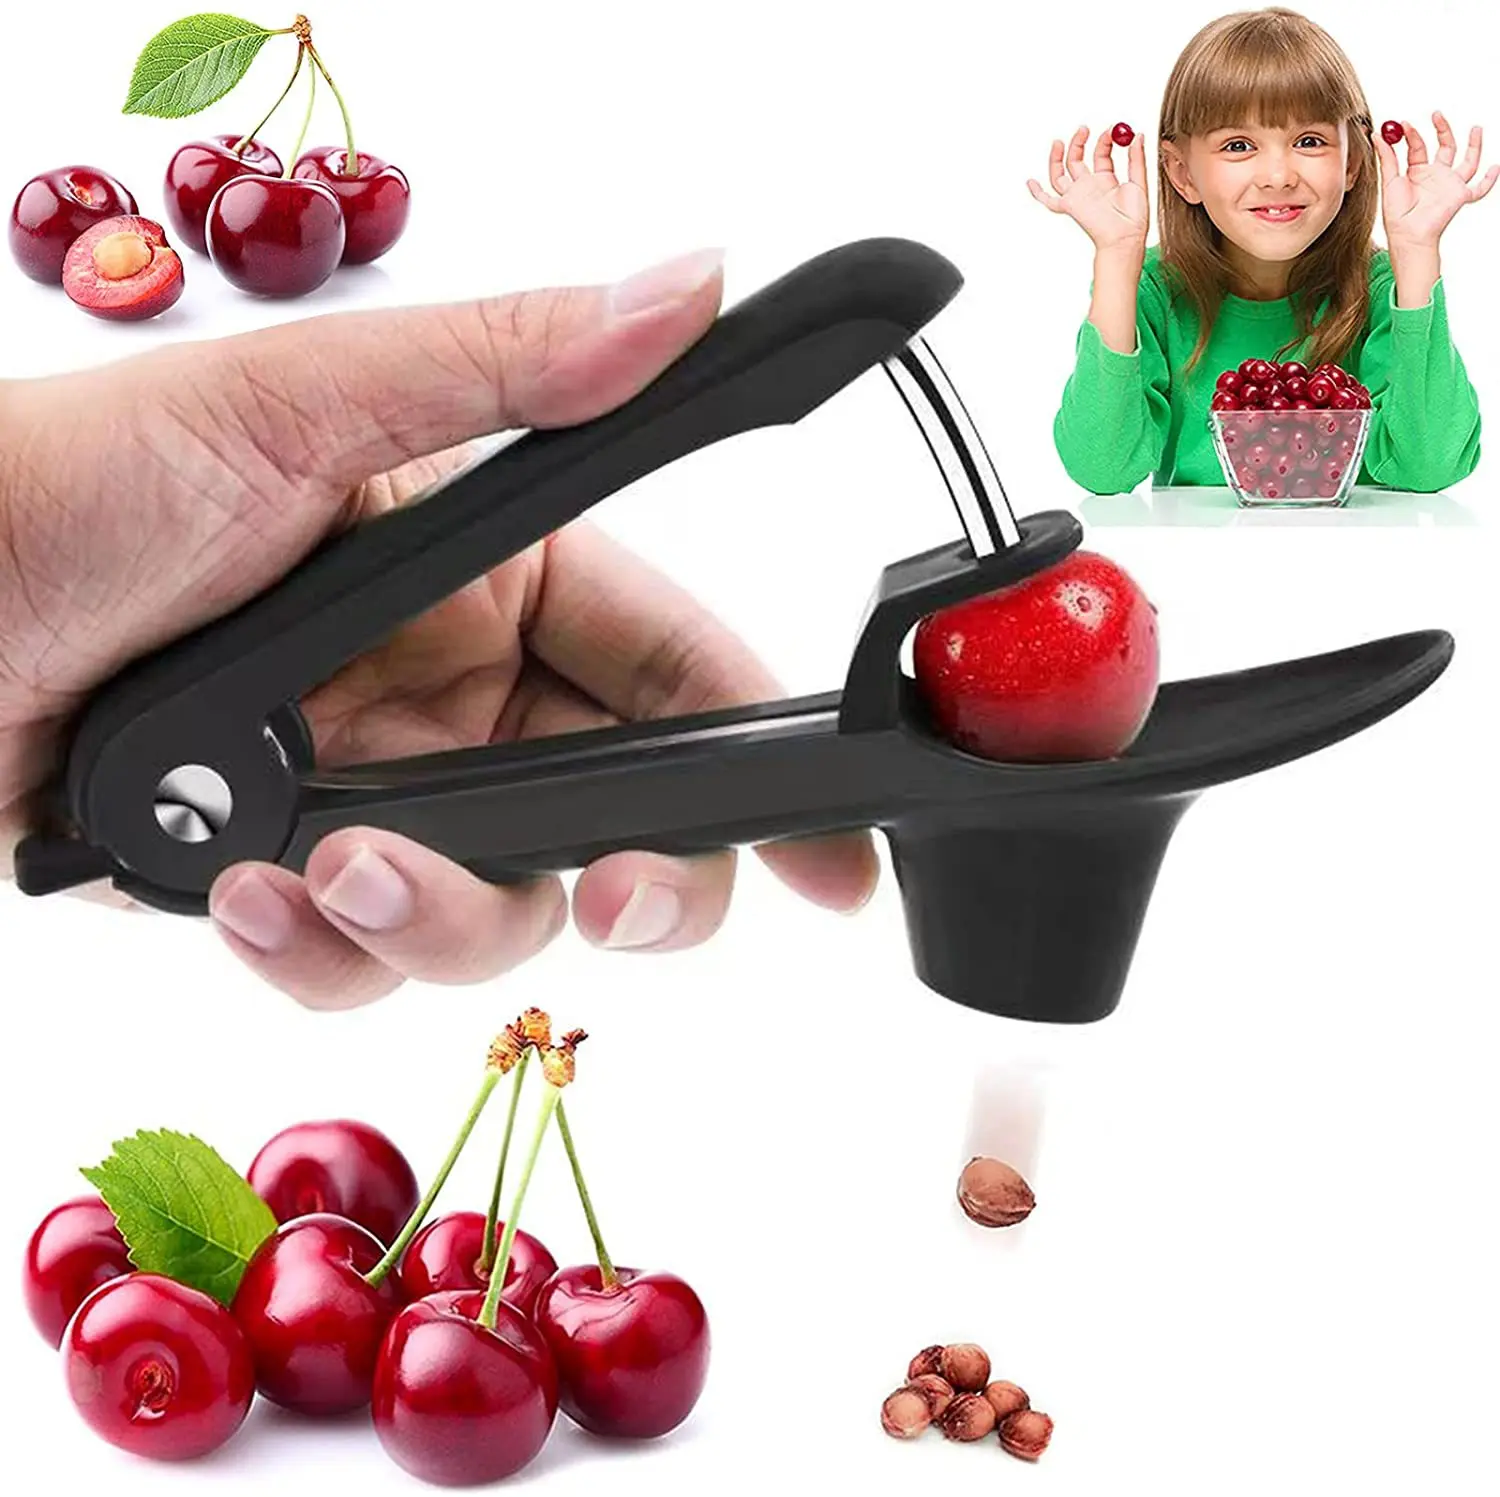 

Fruit Vegetable Tool Portable Cherry Pitters Tool Kitchen Cherry Core Remover Cherry Olive Seed Remover Tool Cherry Corer, Green/black